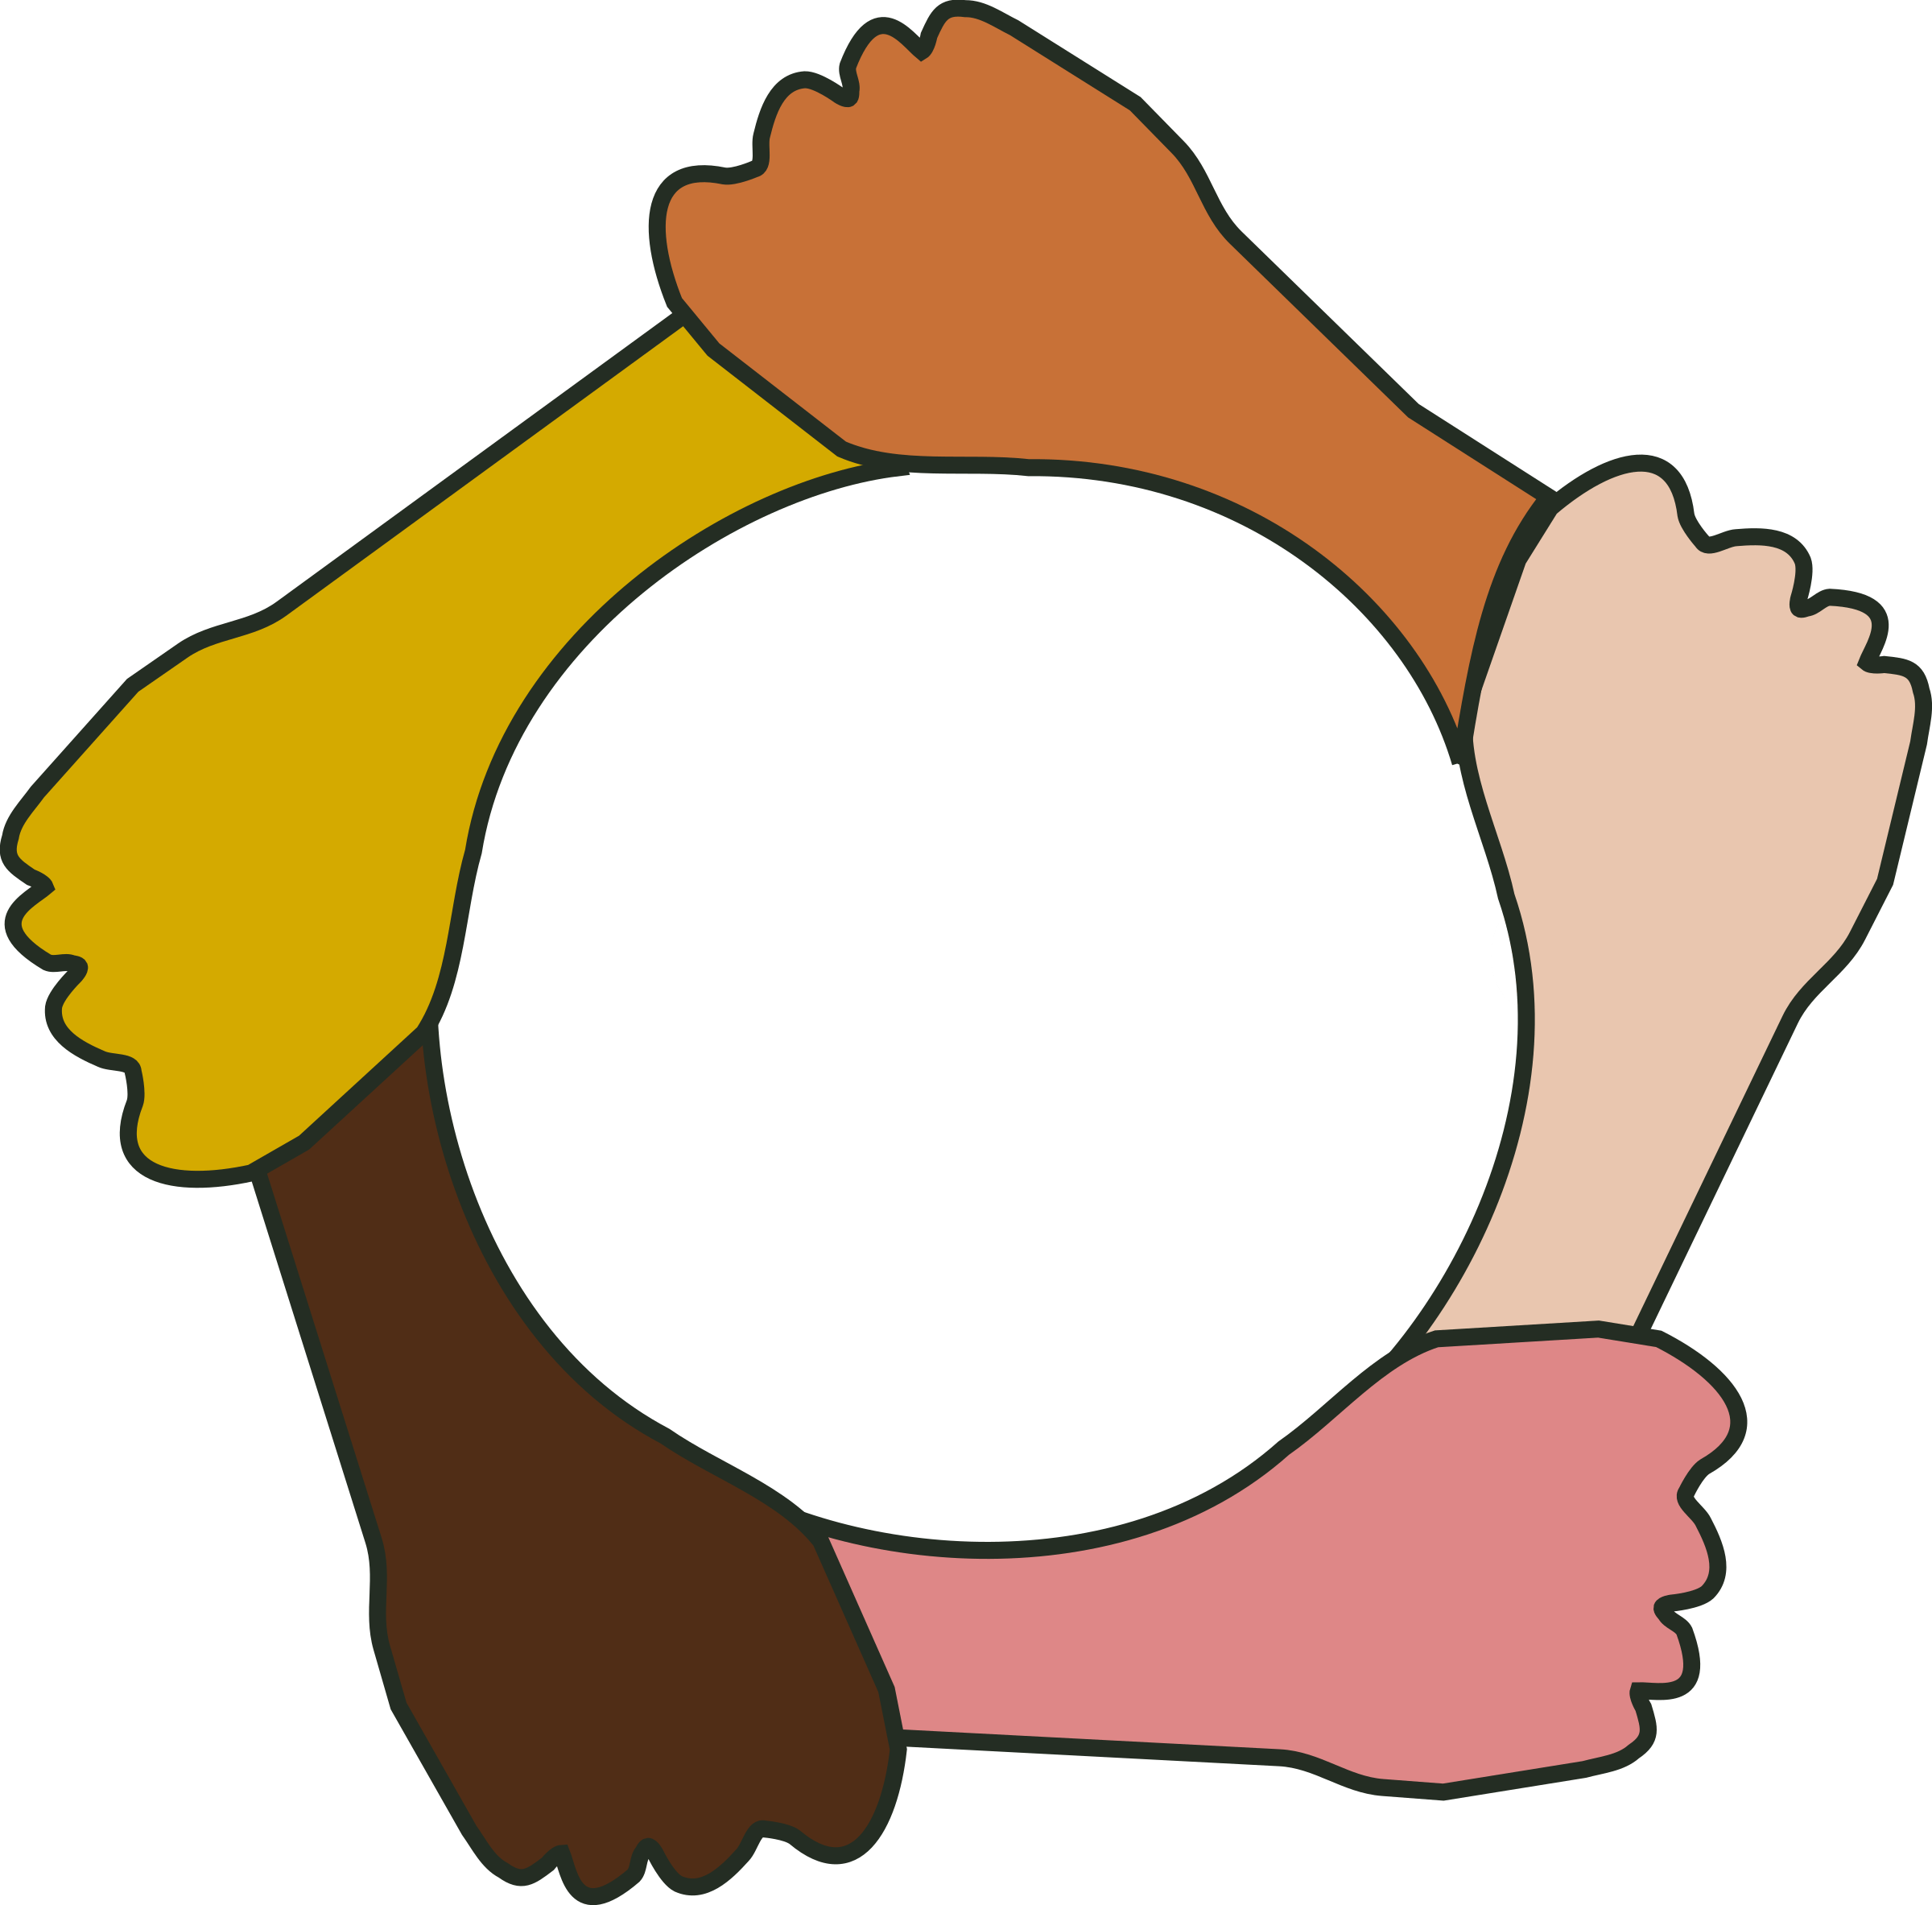 Circle of Hands Logo - Clipart of hands